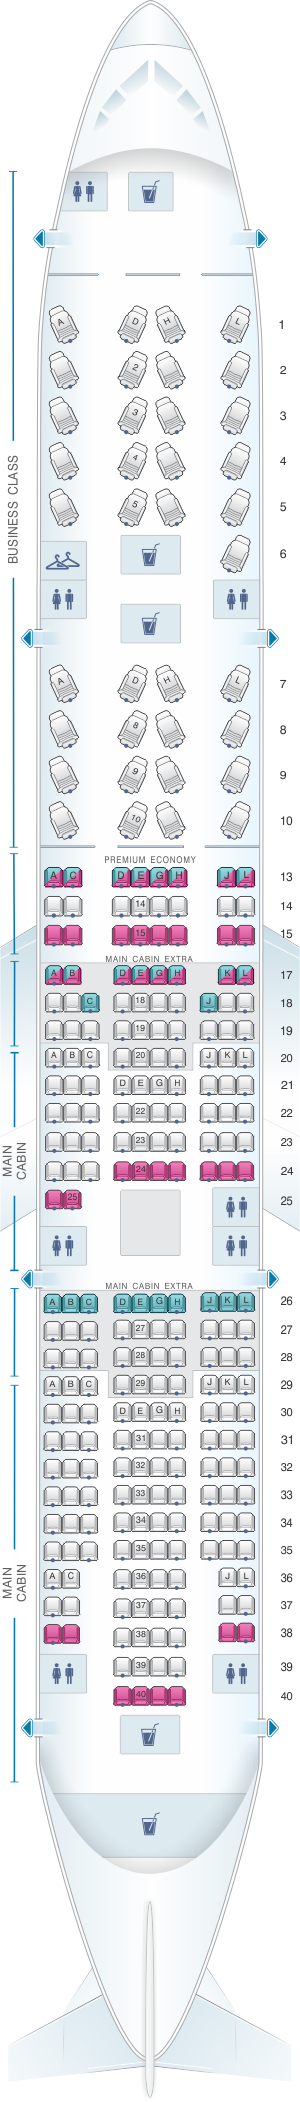 Boeing 777 American Airlines Seating Chart